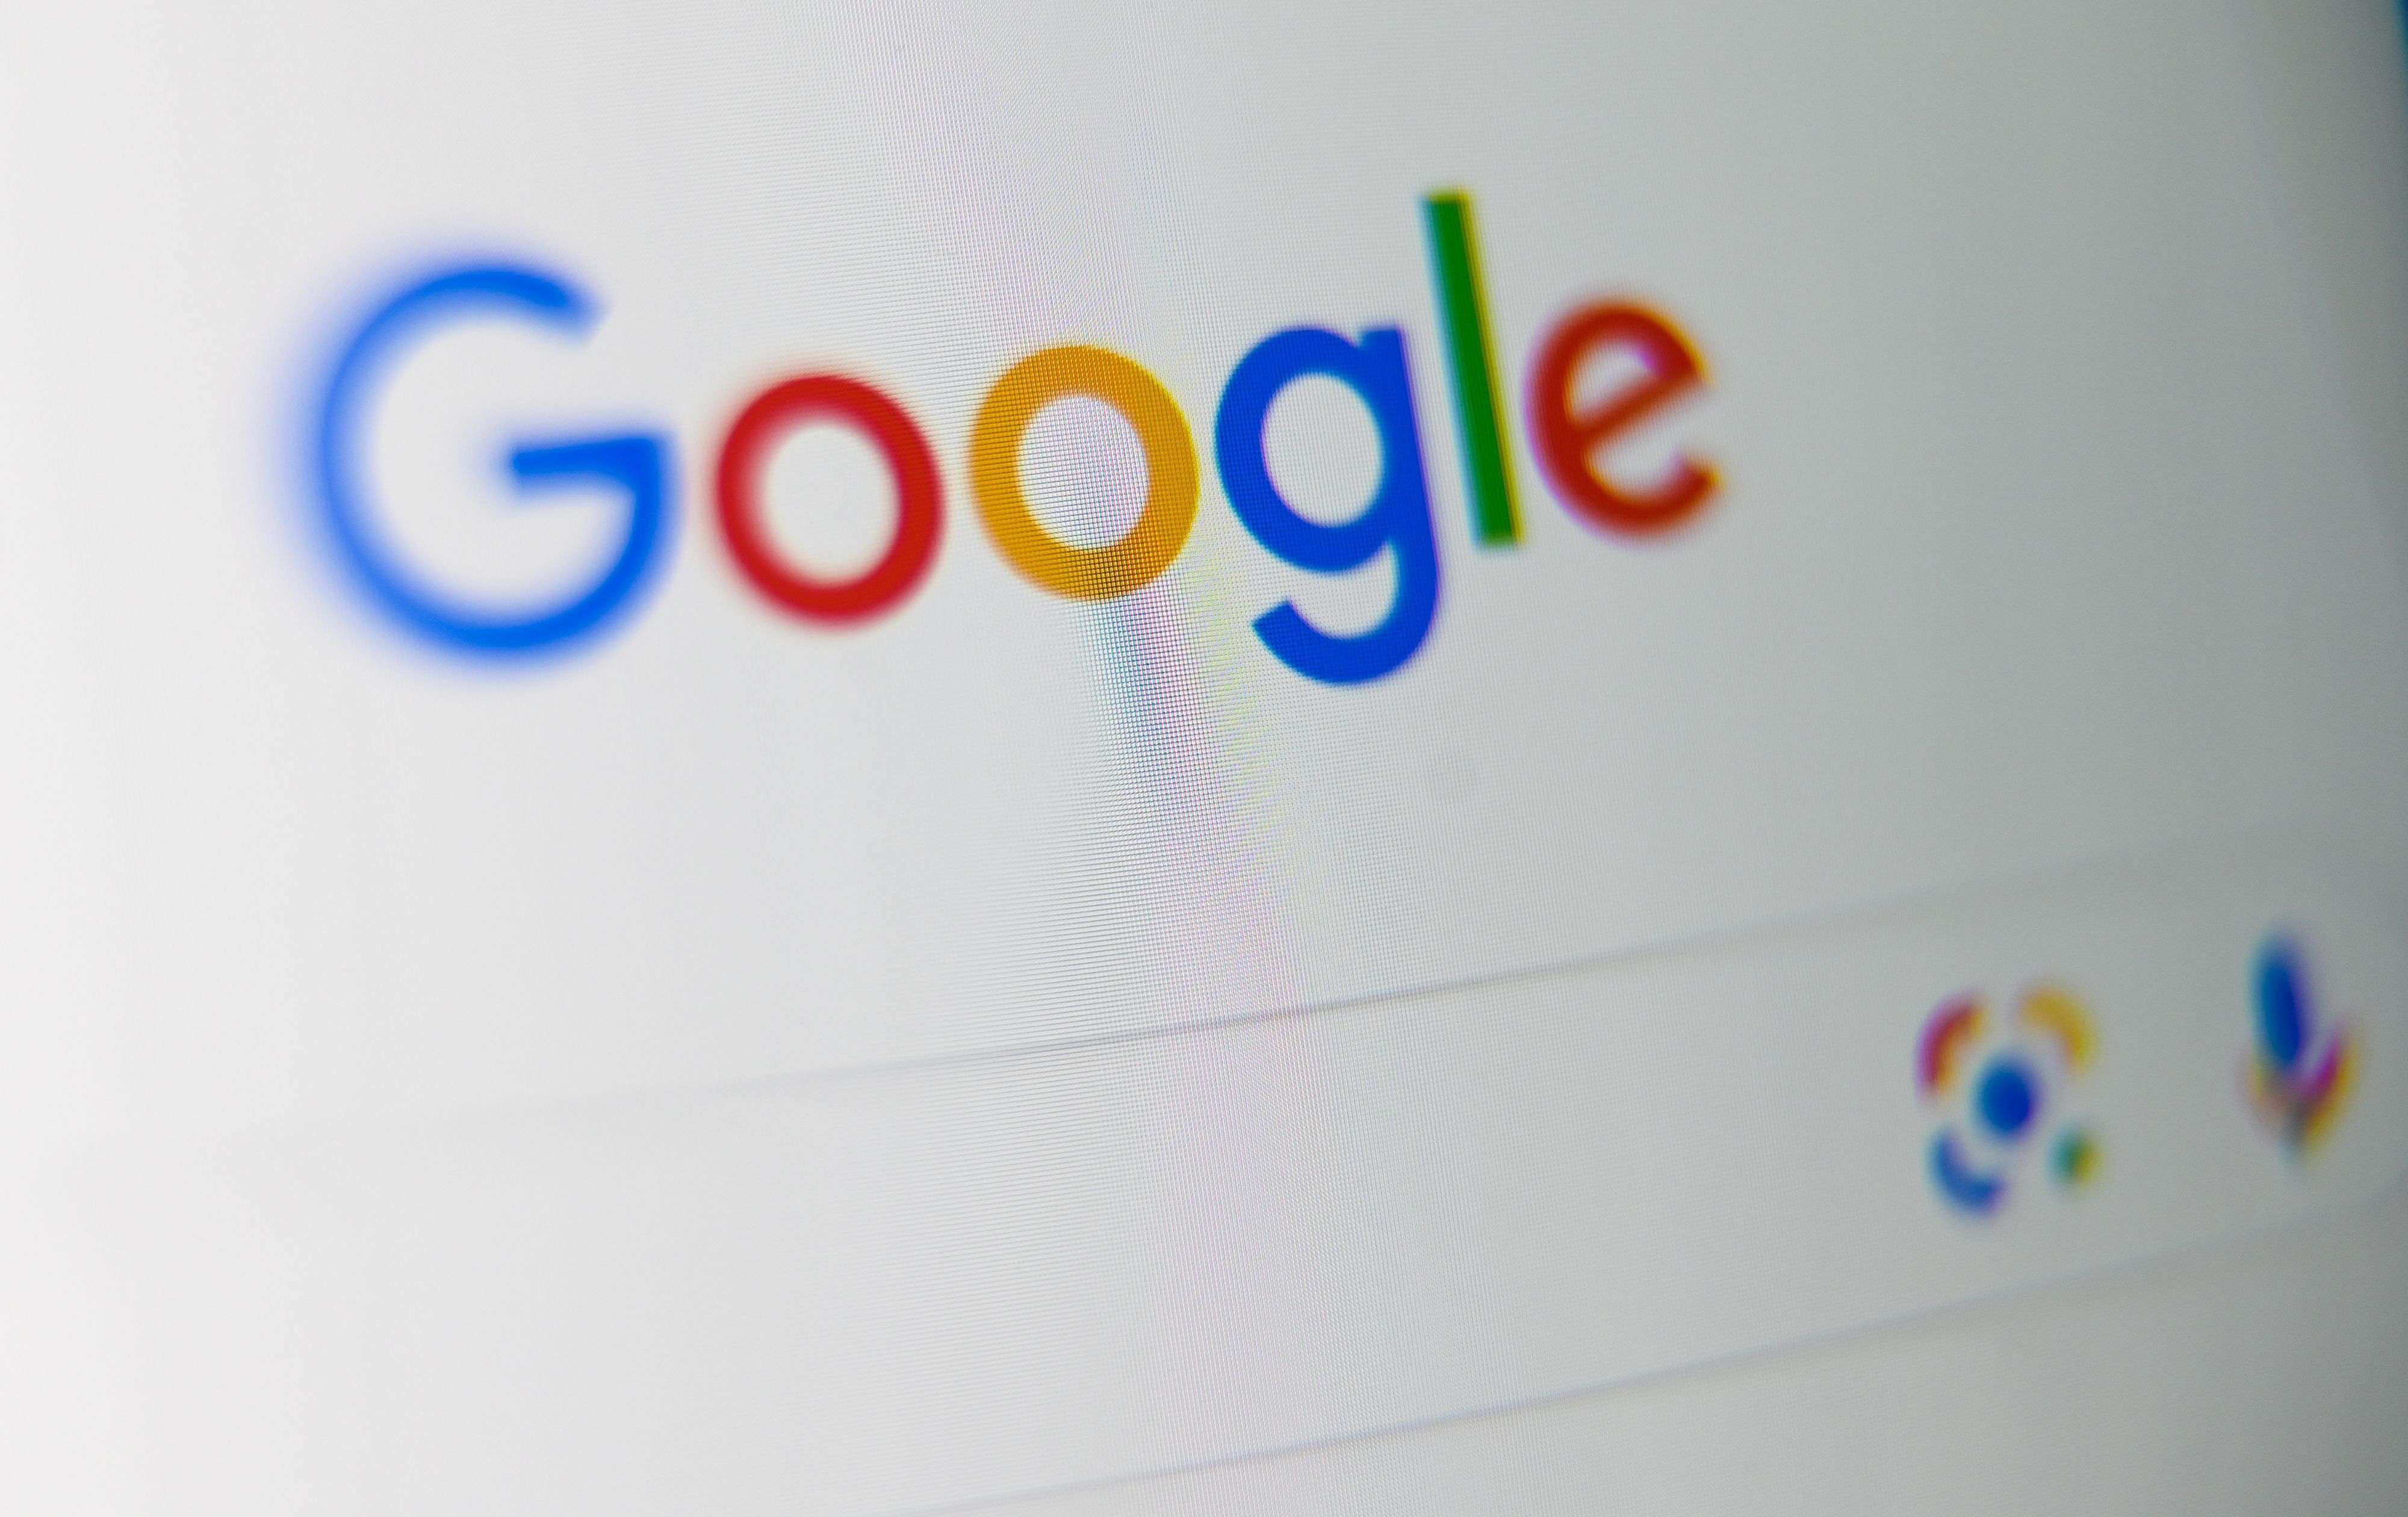 3. US sues Google over search monopoly